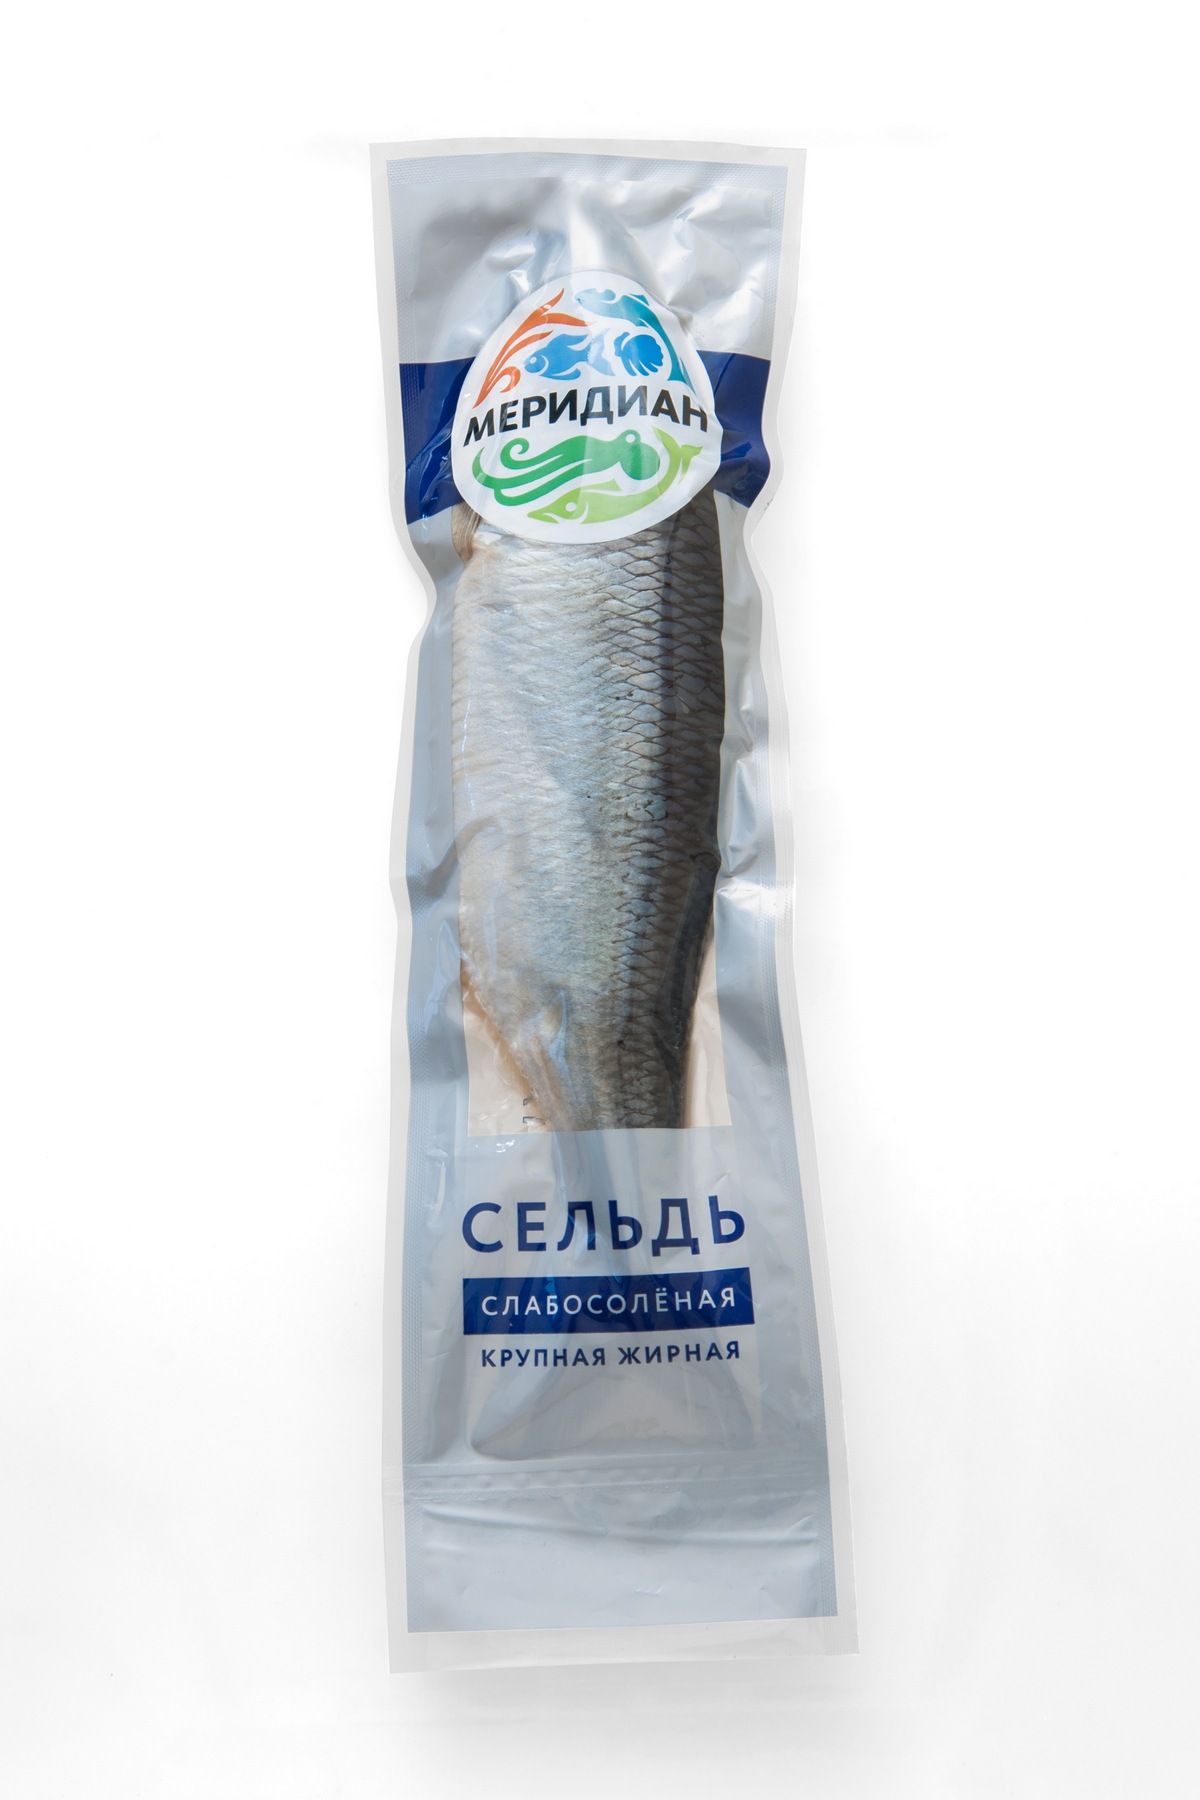 Herring large fatty slightly salted, by weight